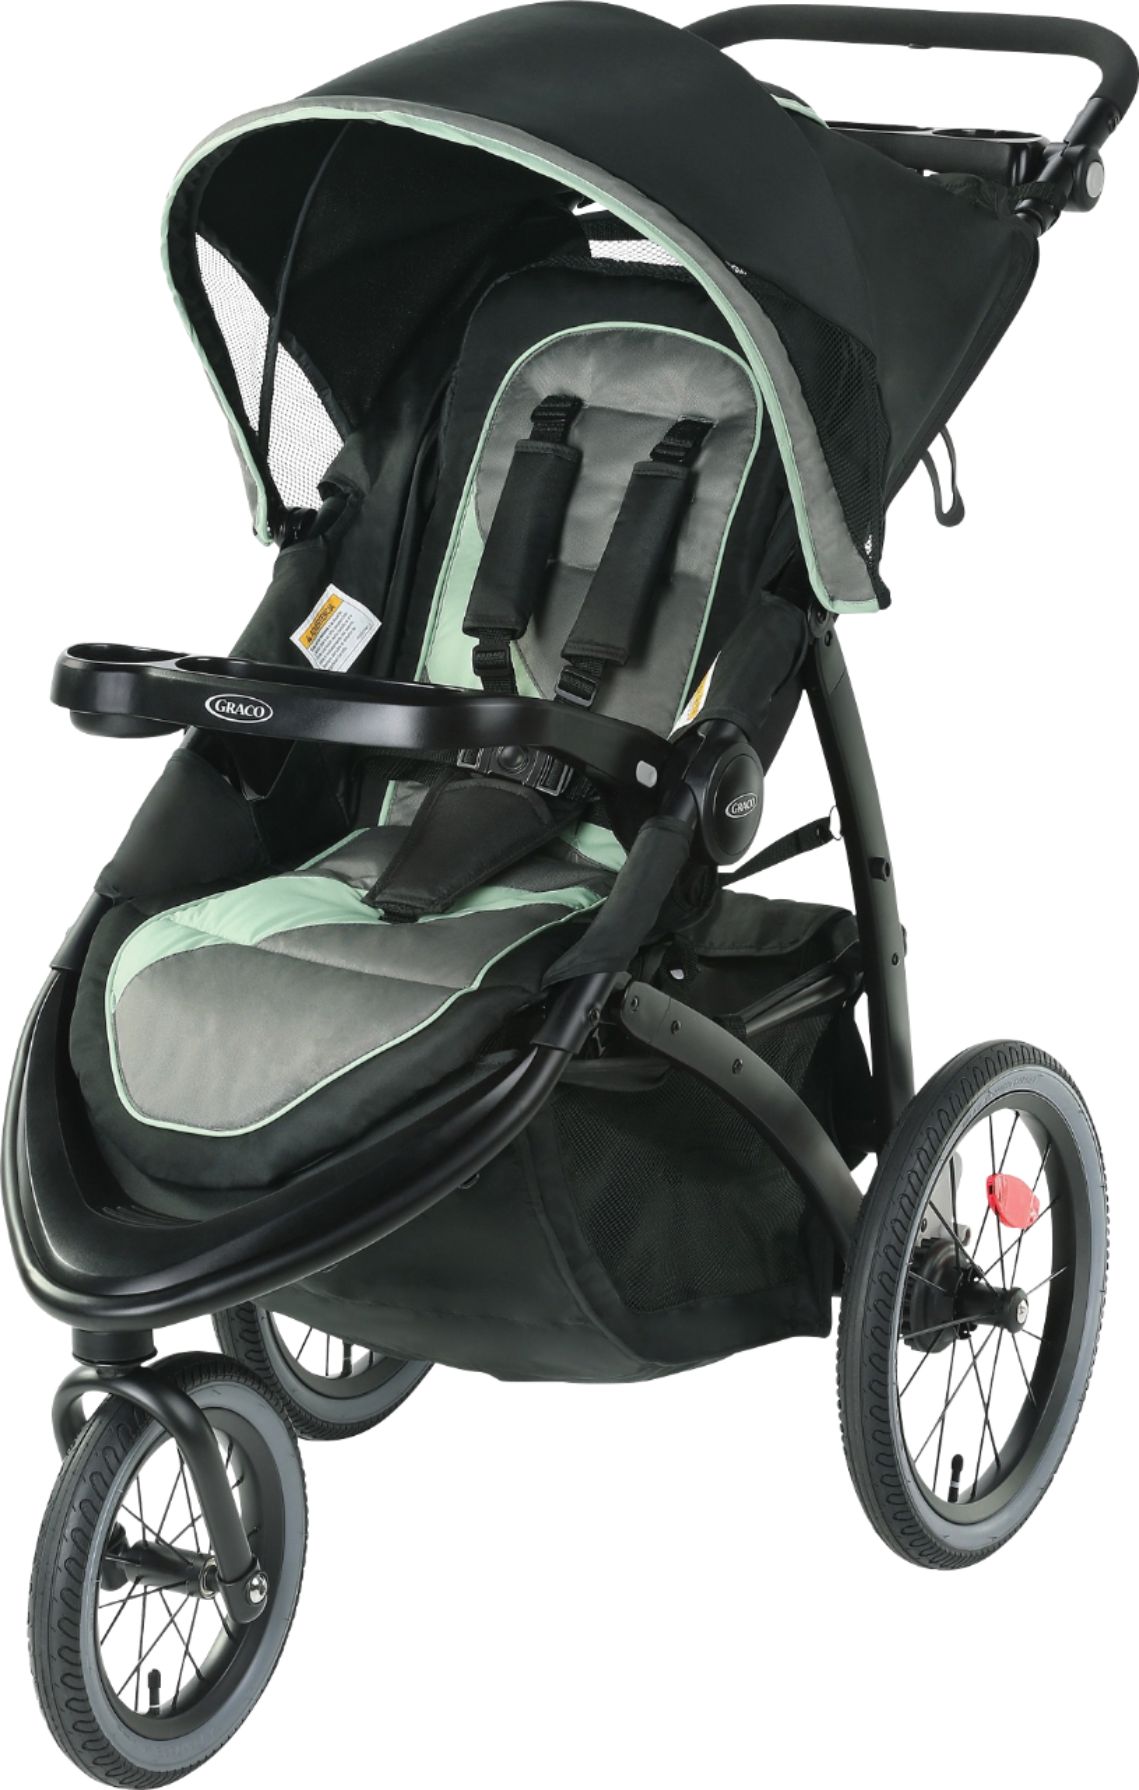 graco jogger stroller and carseat